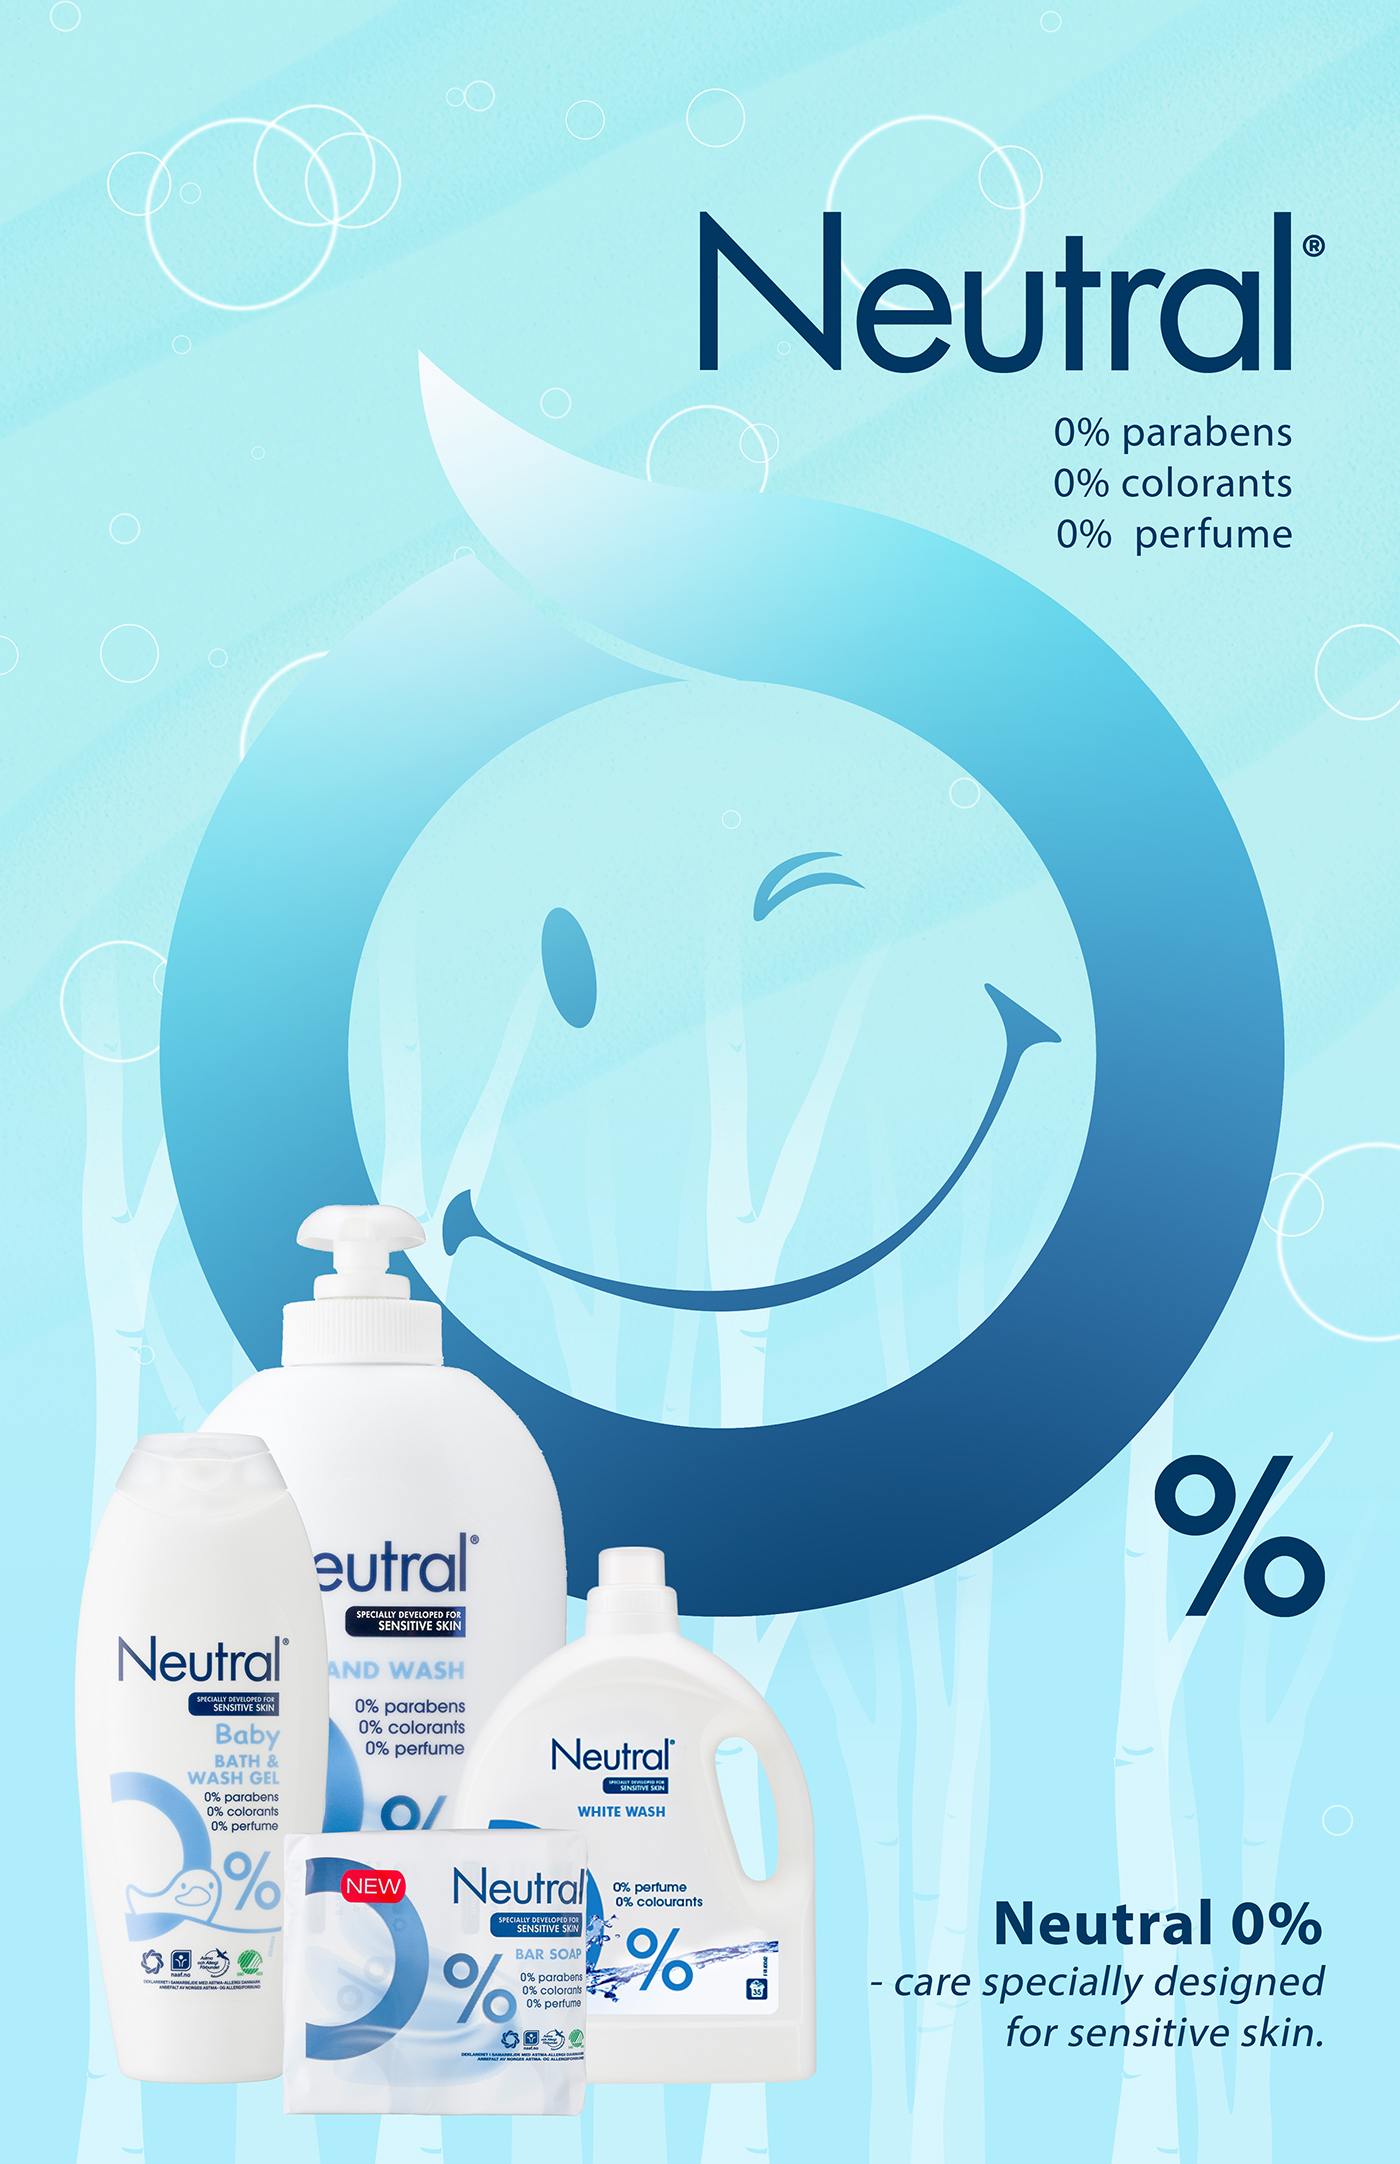 Unilever Neutral Neutral Skin Sensitive Skin 0% campaign Advertising  product baby family